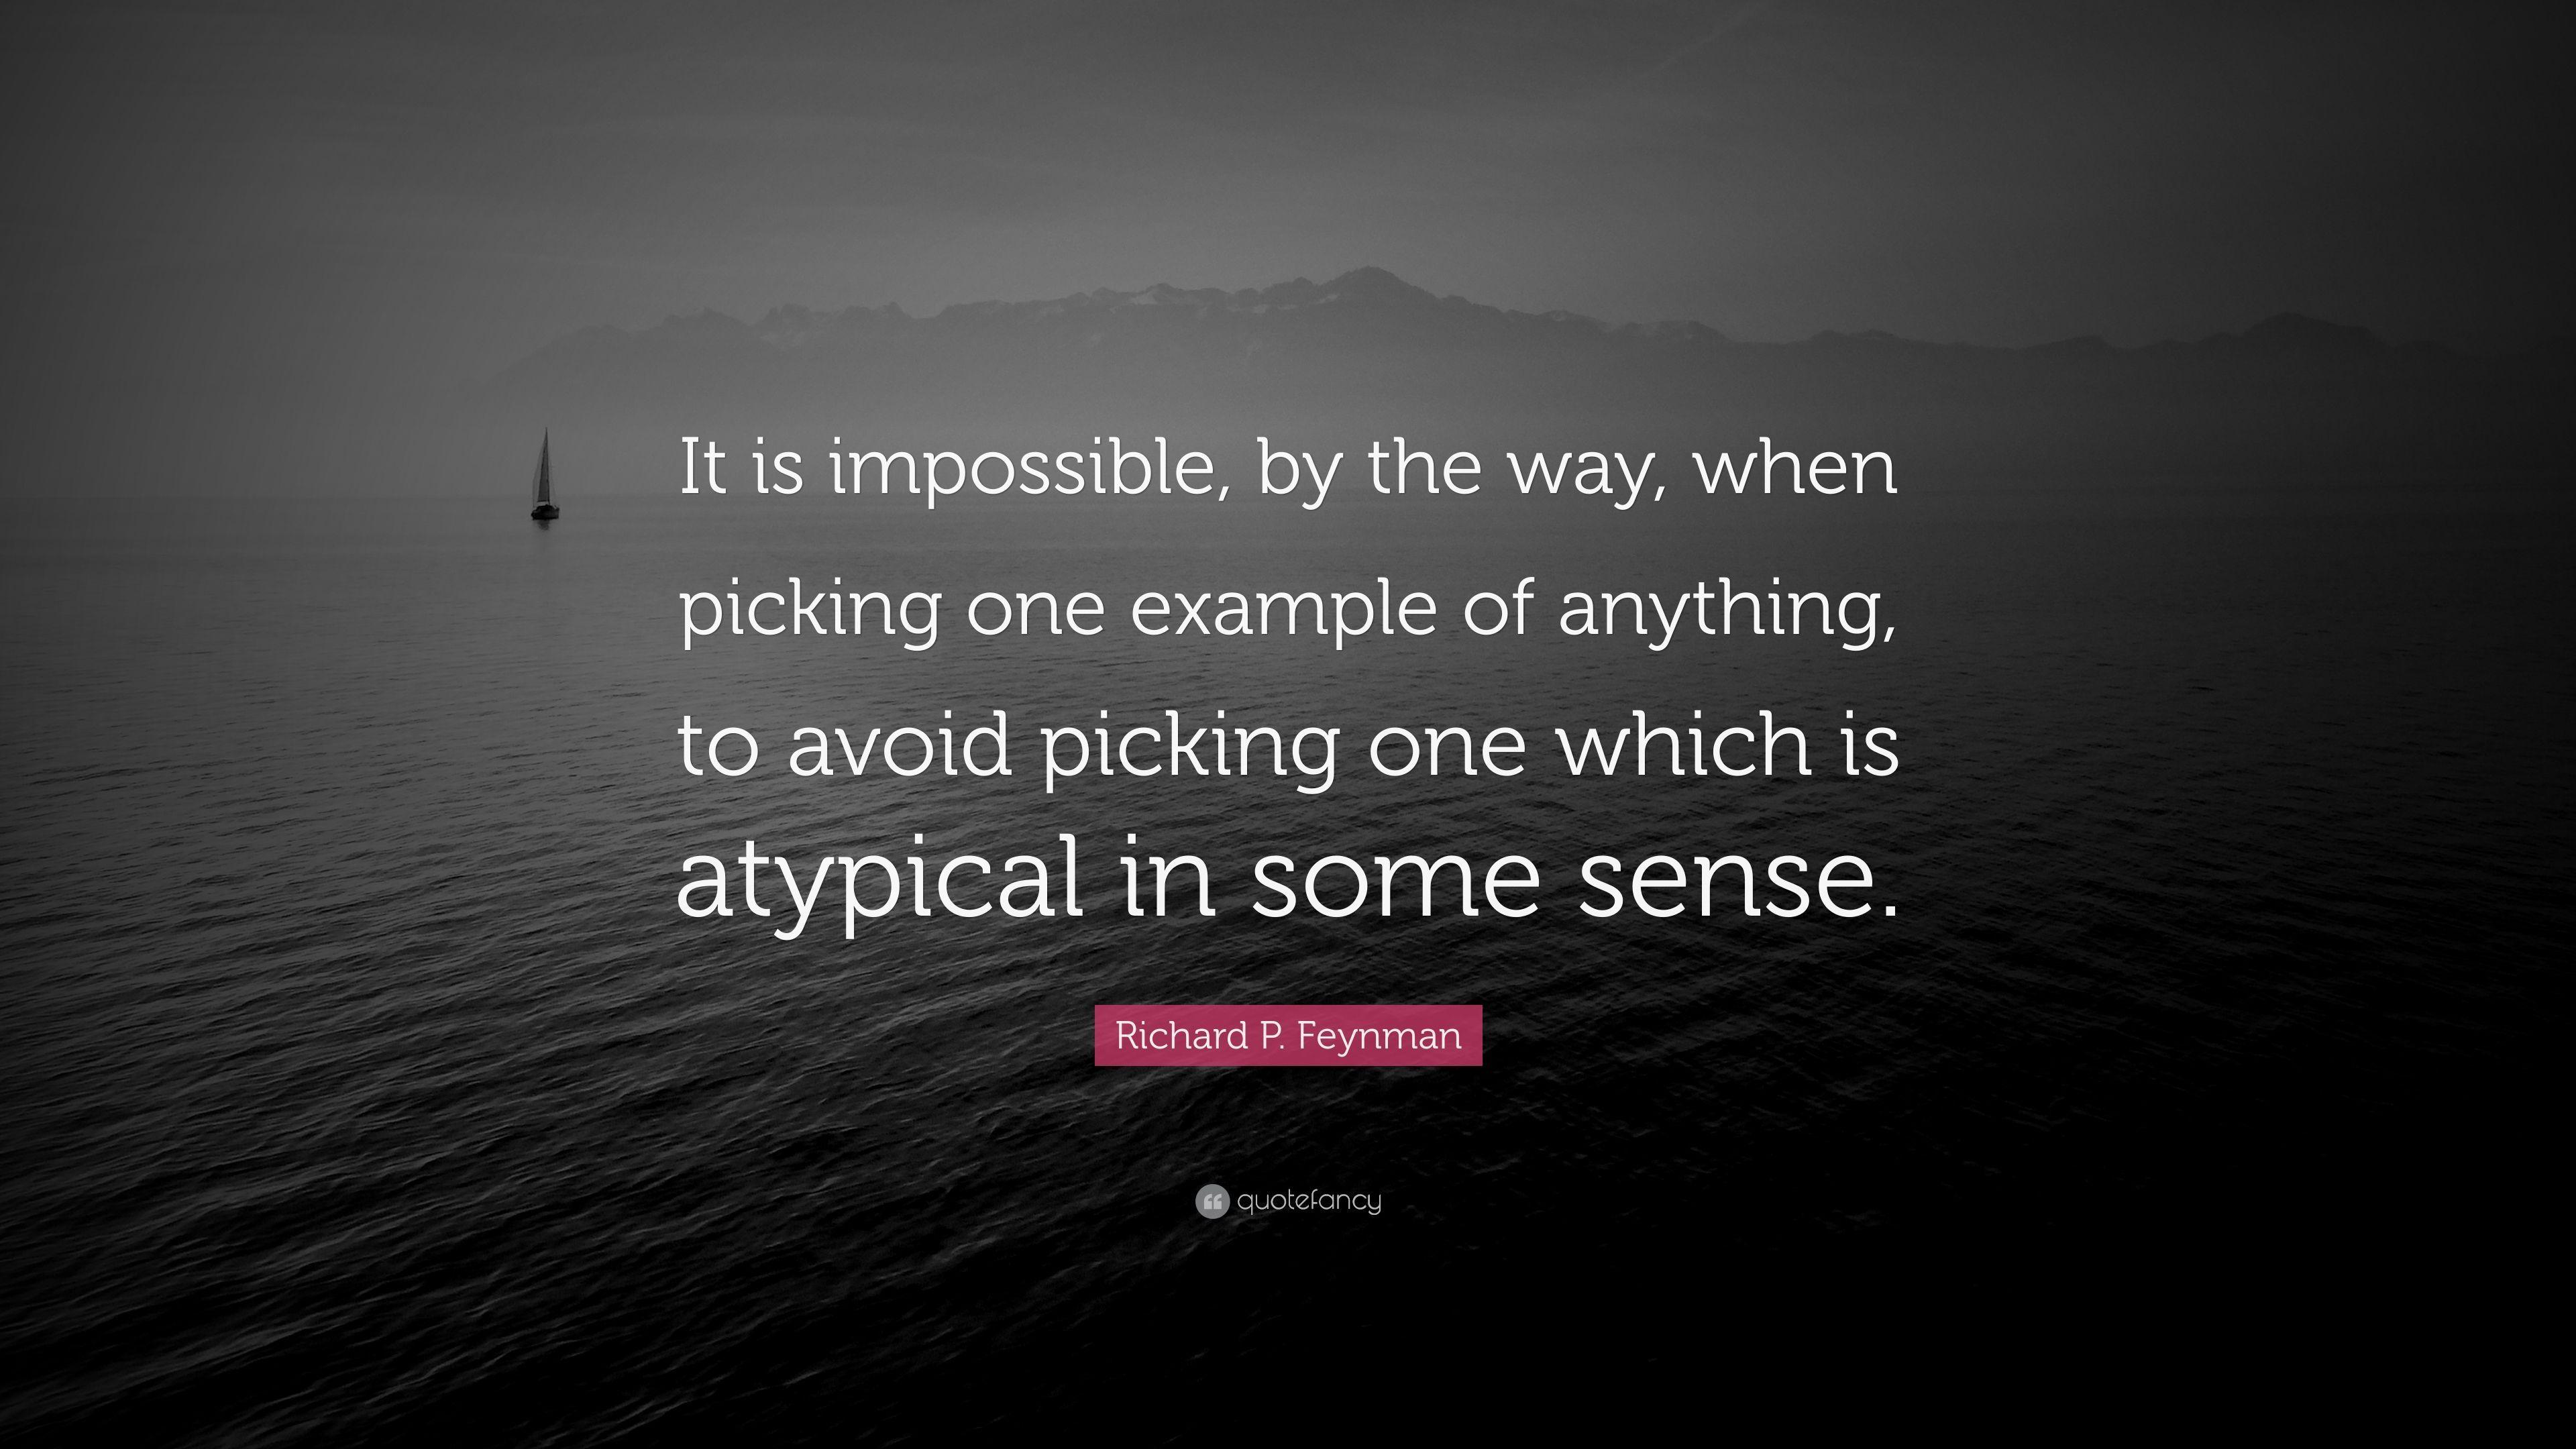 Richard P. Feynman Quote: “It is impossible, by the way, when